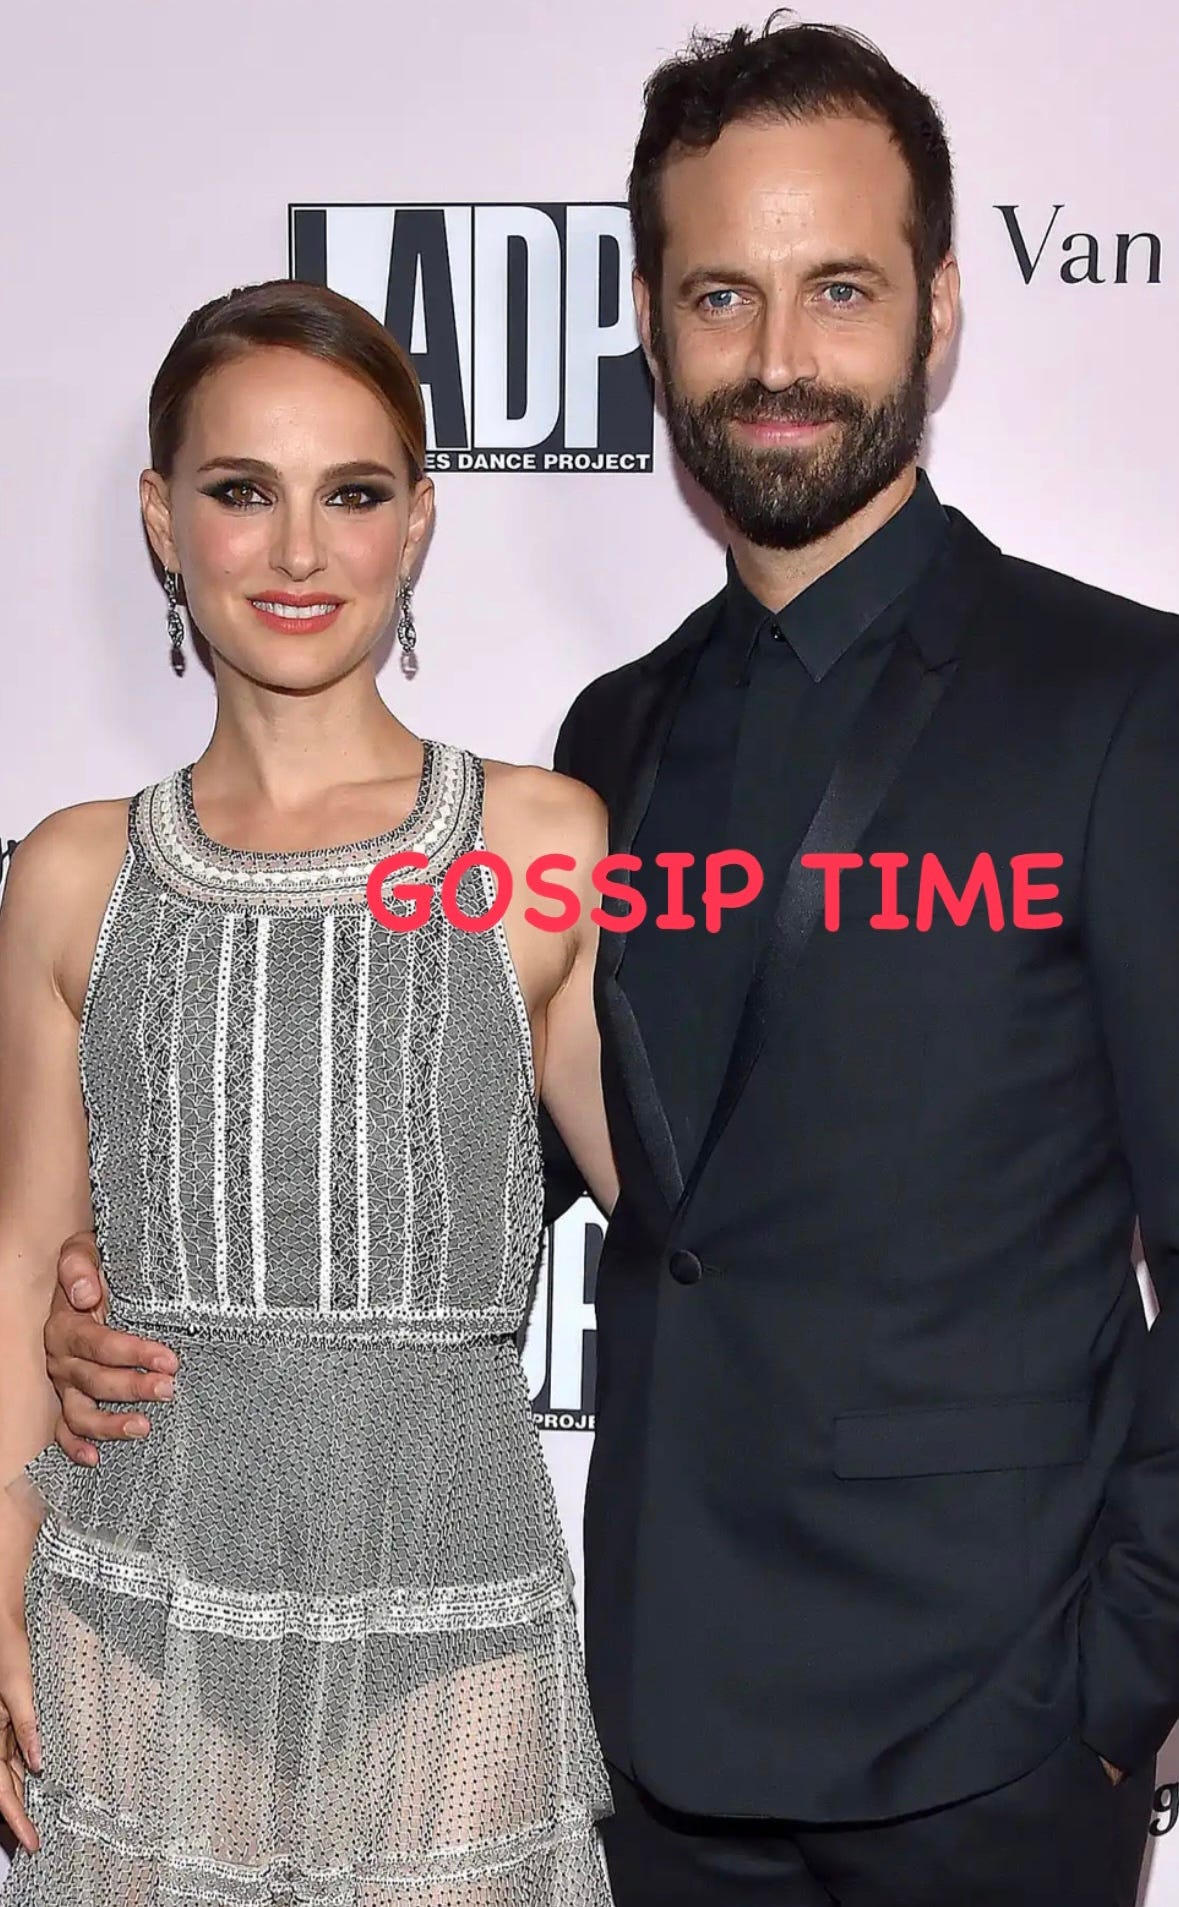 The Natalie Portman And Benjamin Millepied Affair Explained 2994